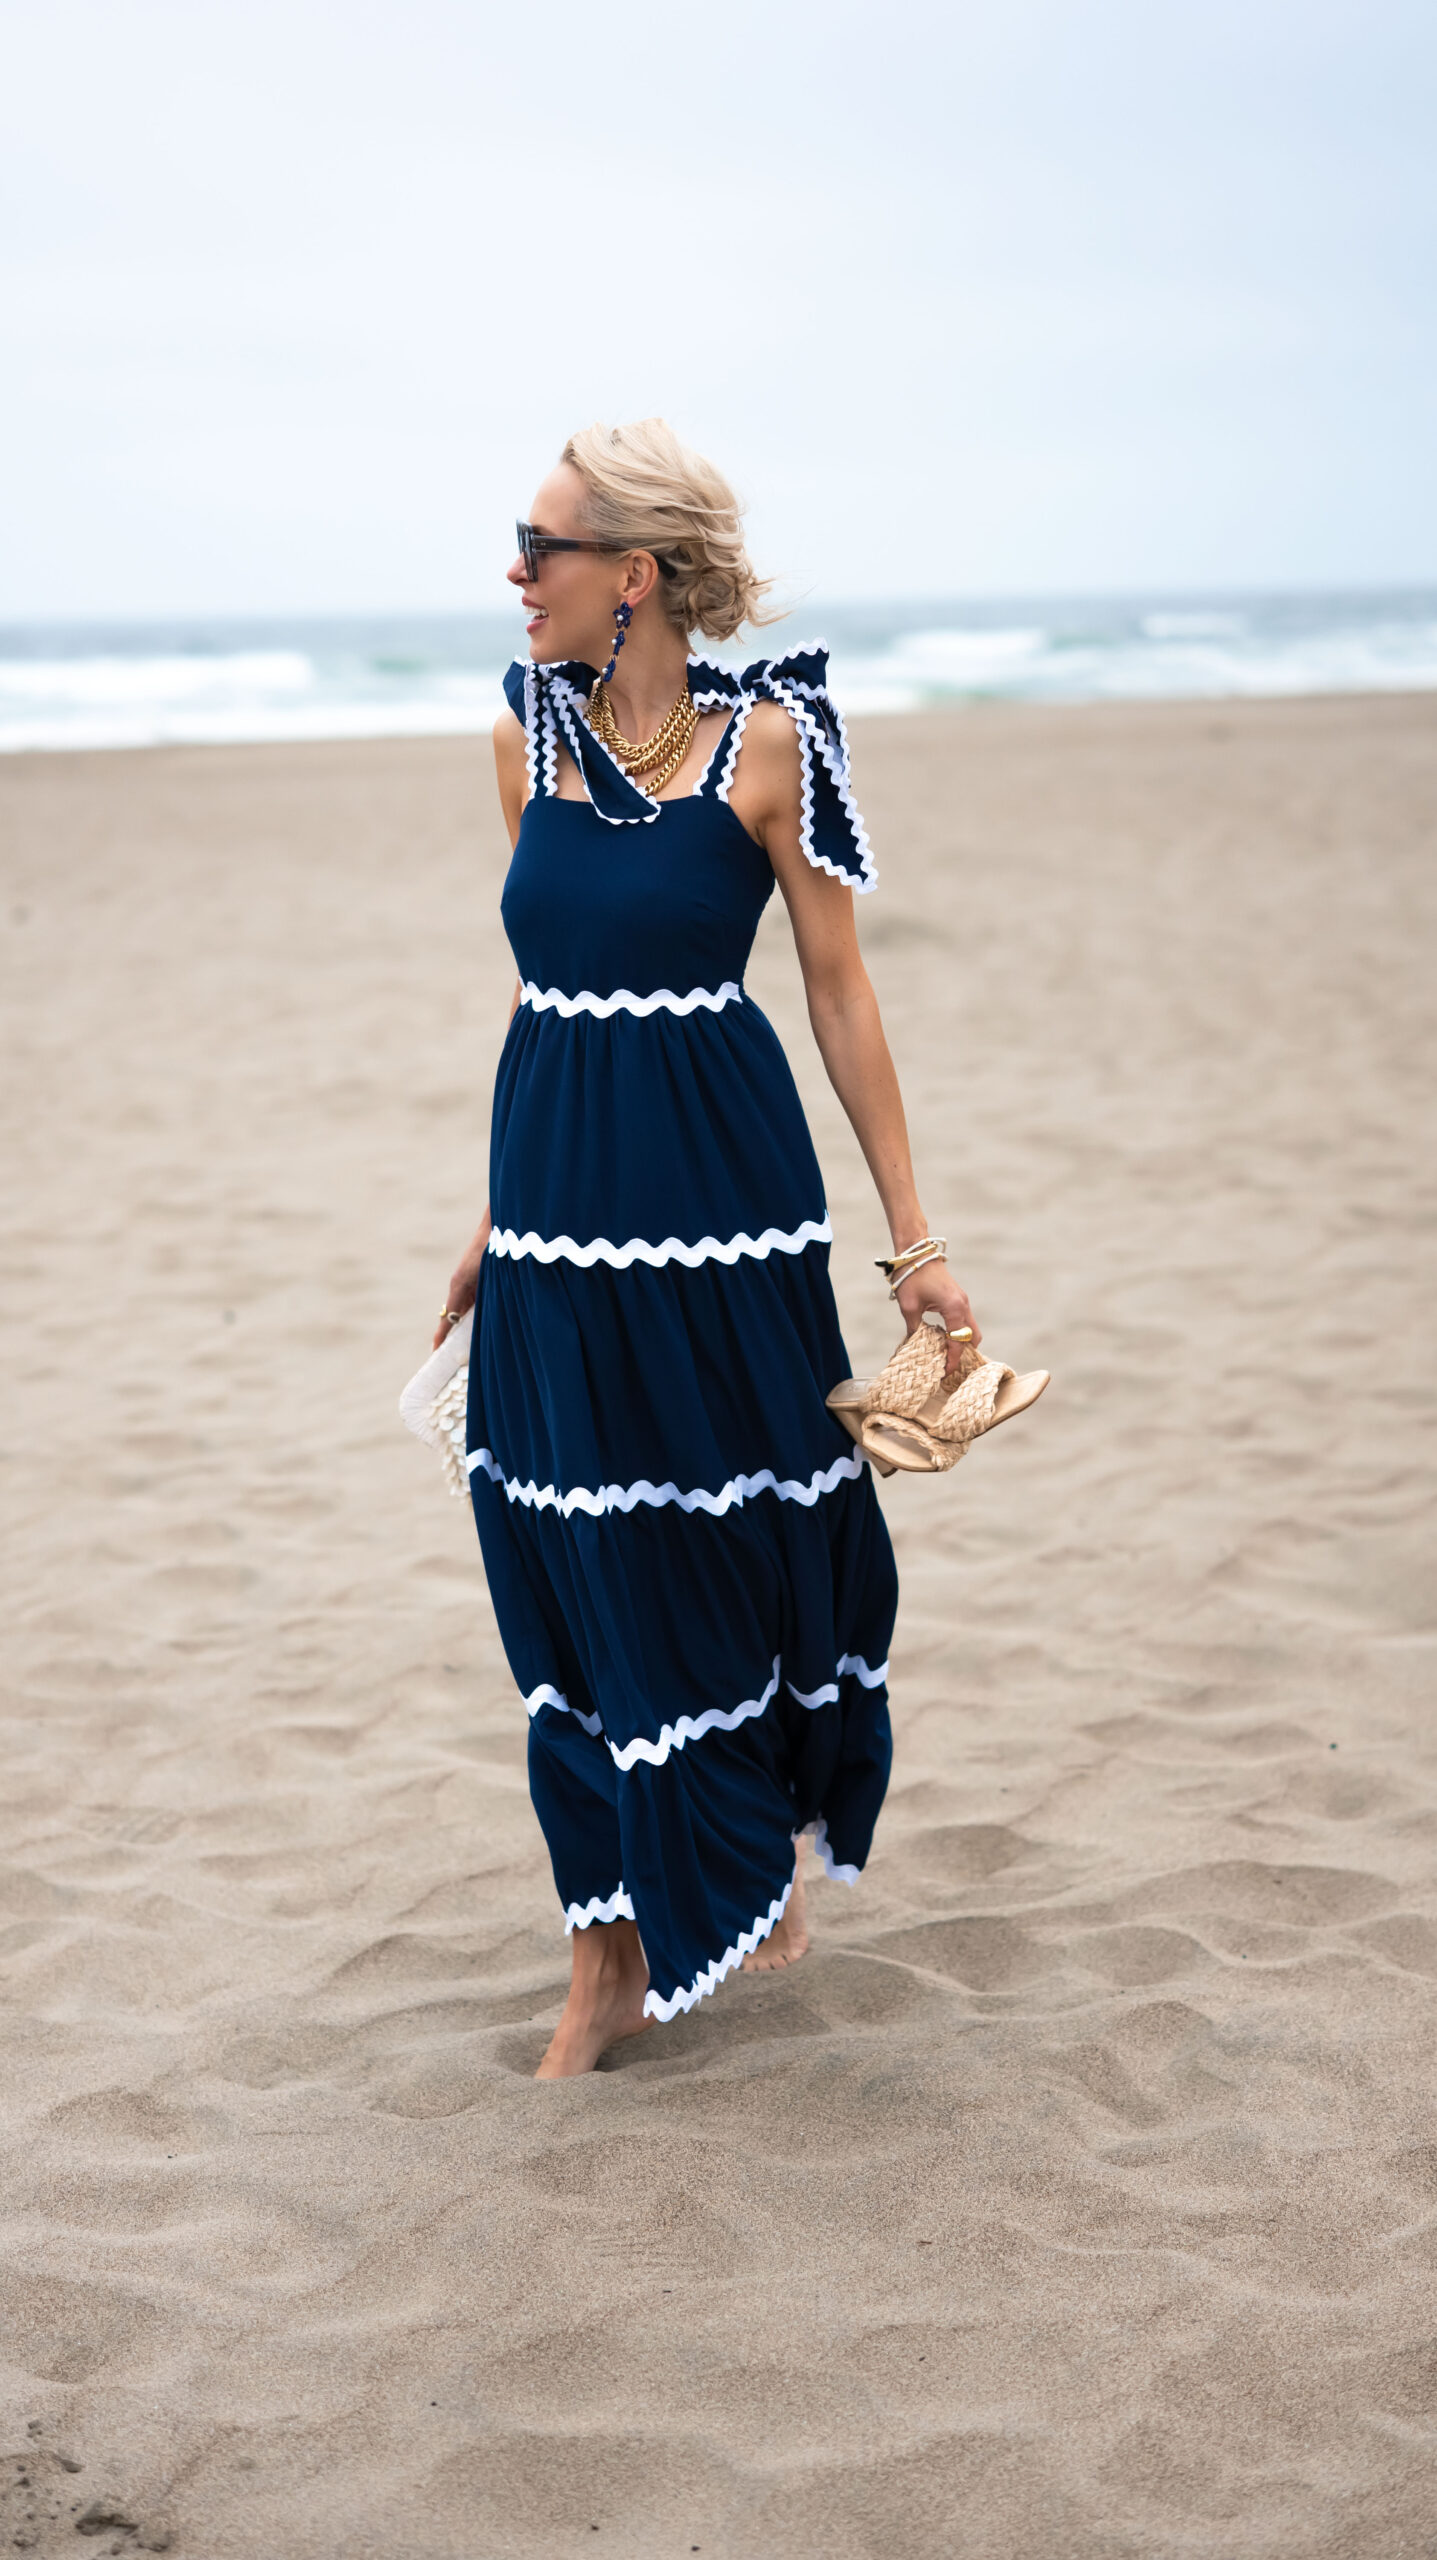 sail to sable new arrivals, beach dresses, vacation dresses, sail to sable dresses, vacation style, resort wear, lombard and fifth, veronica levy